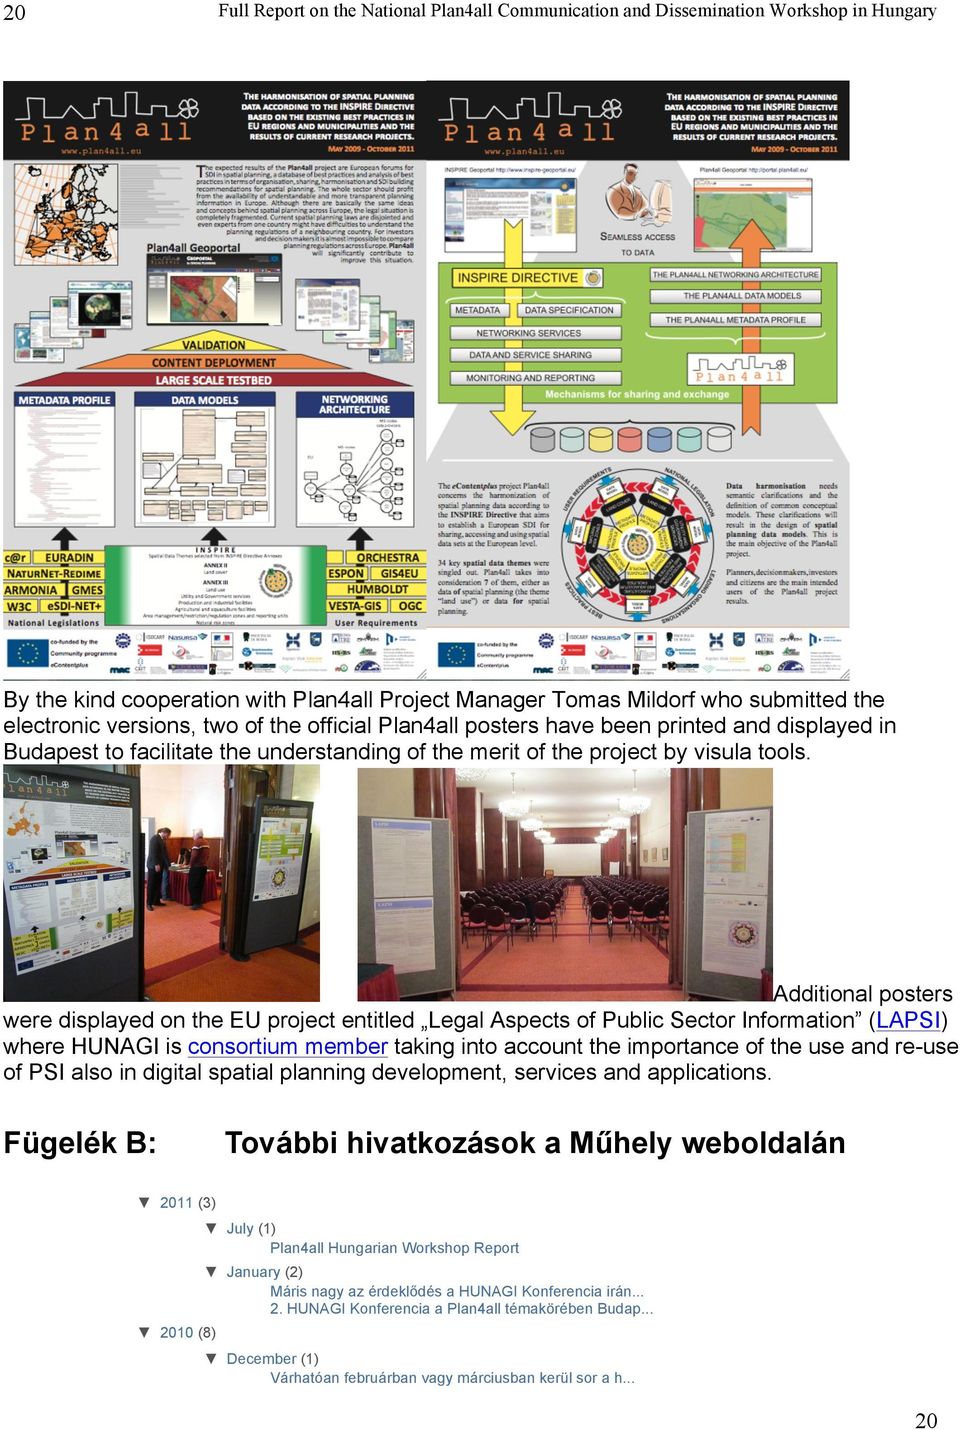 Additional posters were displayed on the EU project entitled Legal Aspects of Public Sector Information (LAPSI) where HUNAGI is consortium member taking into account the importance of the use and